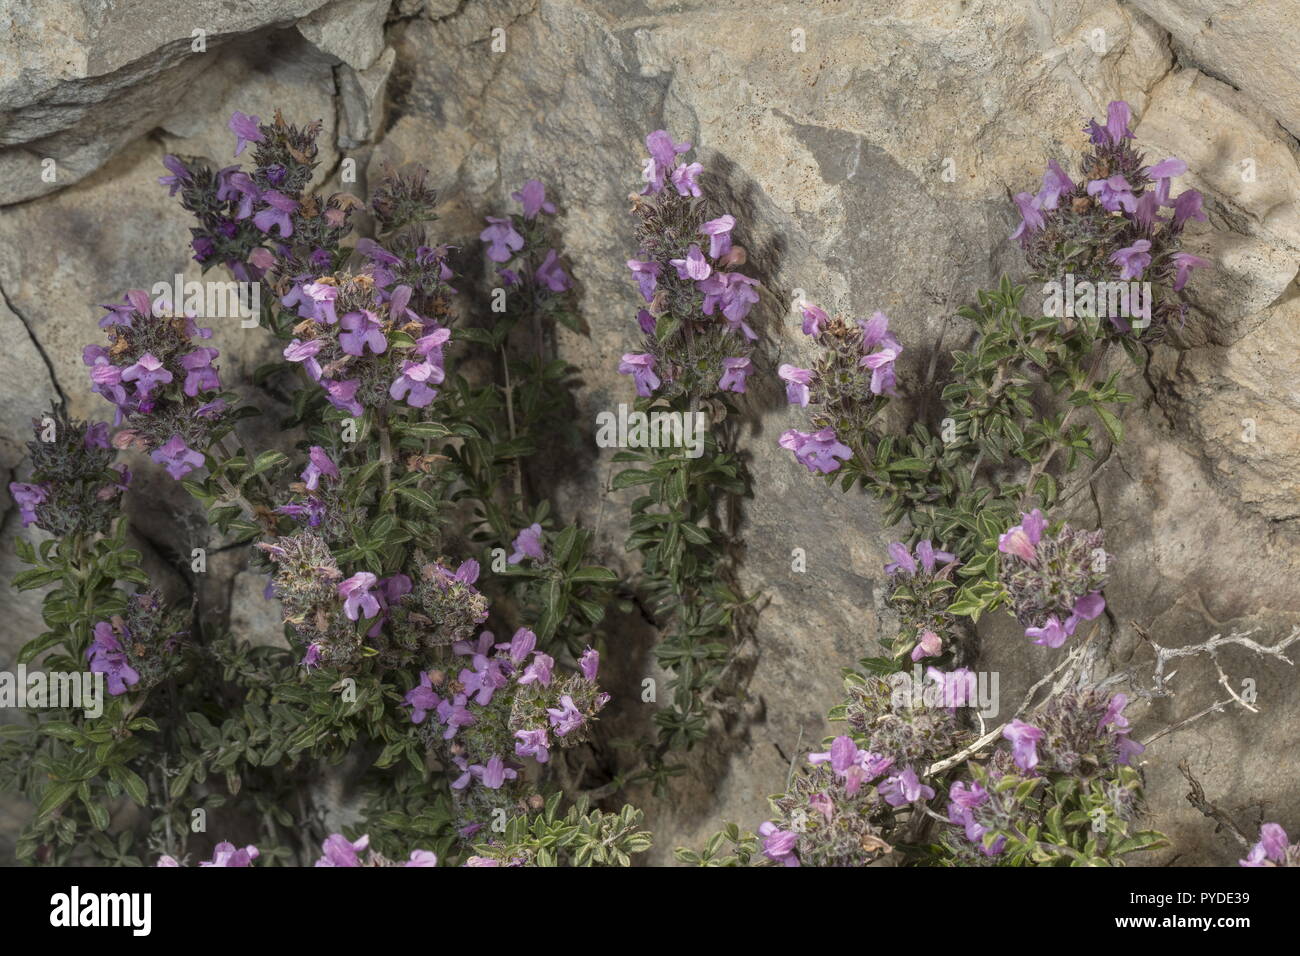 Thyme-Leaved Savory, Satureja thymbra, in flower. Aromatic herb. Rhodes, Greece. Stock Photo